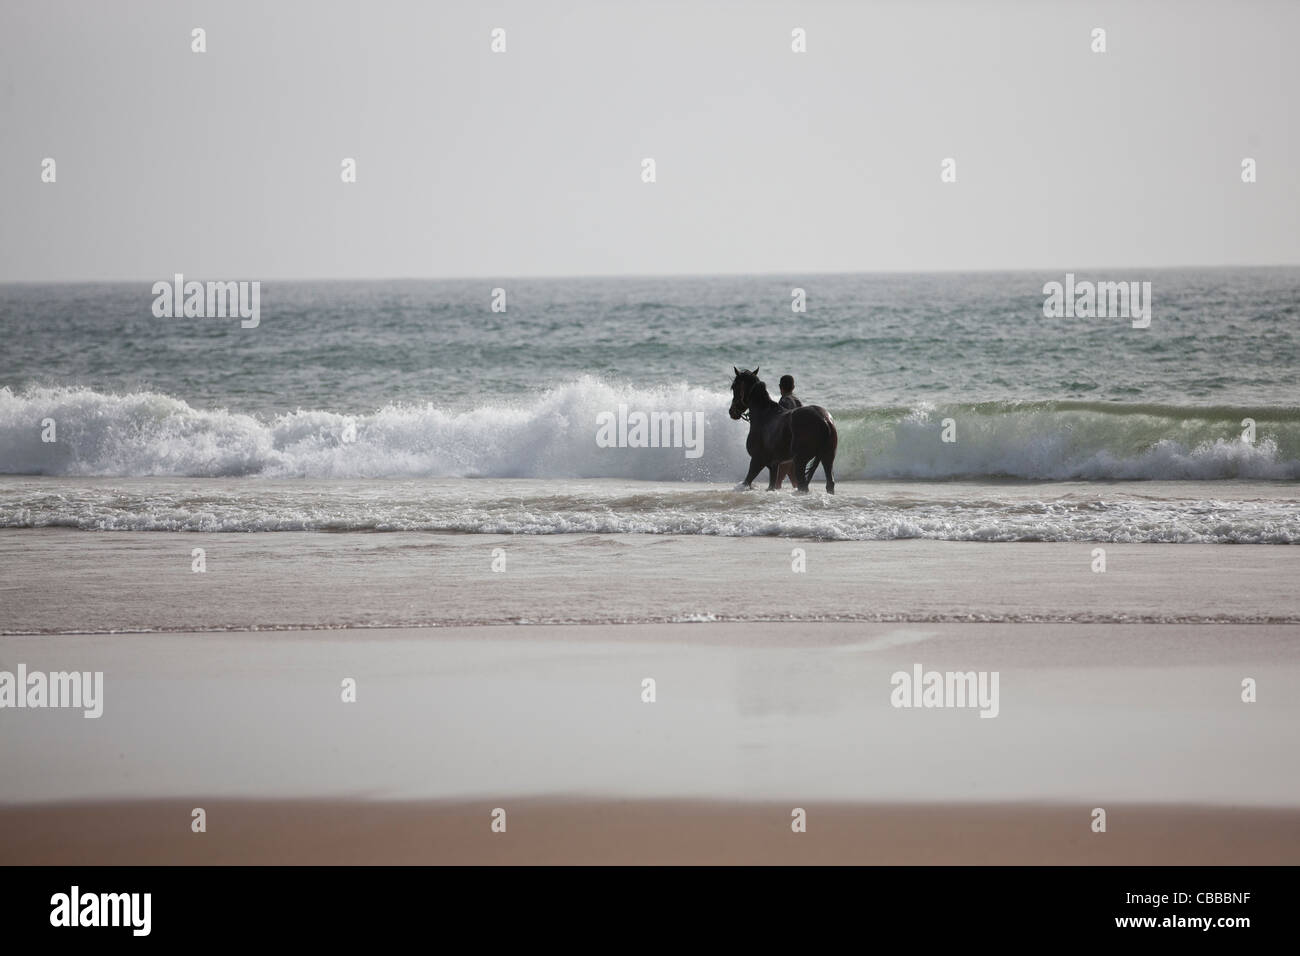 A man and a horse standing in the sea Stock Photo